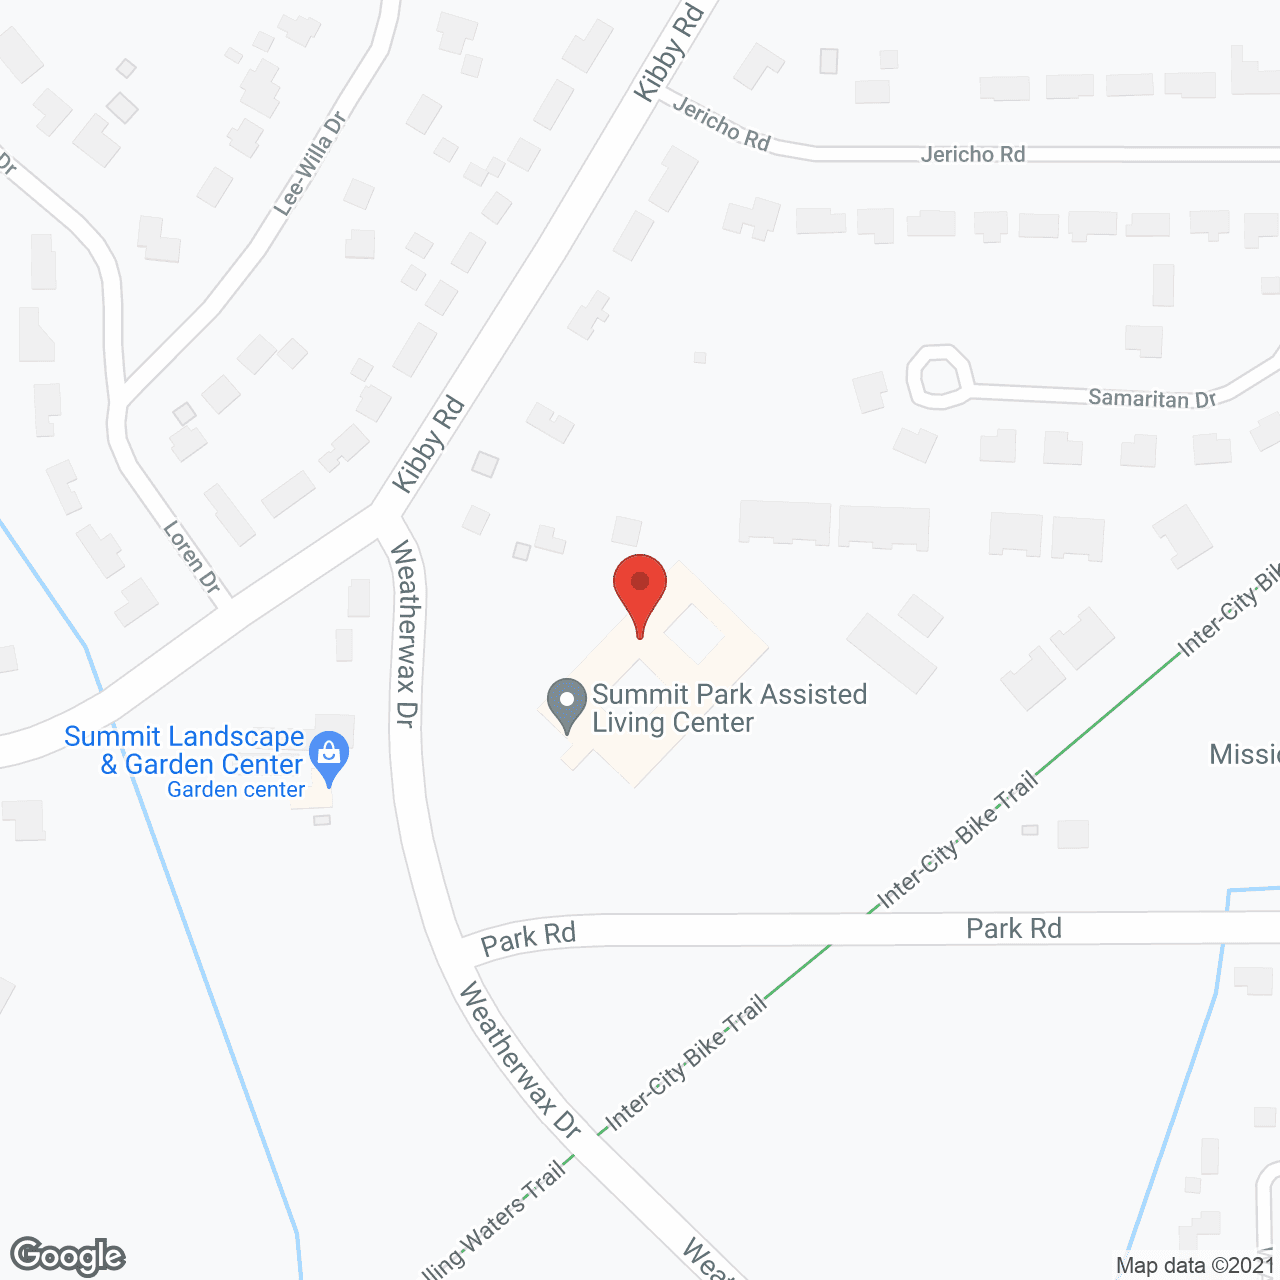 Summit Park Assisted Living Center in google map